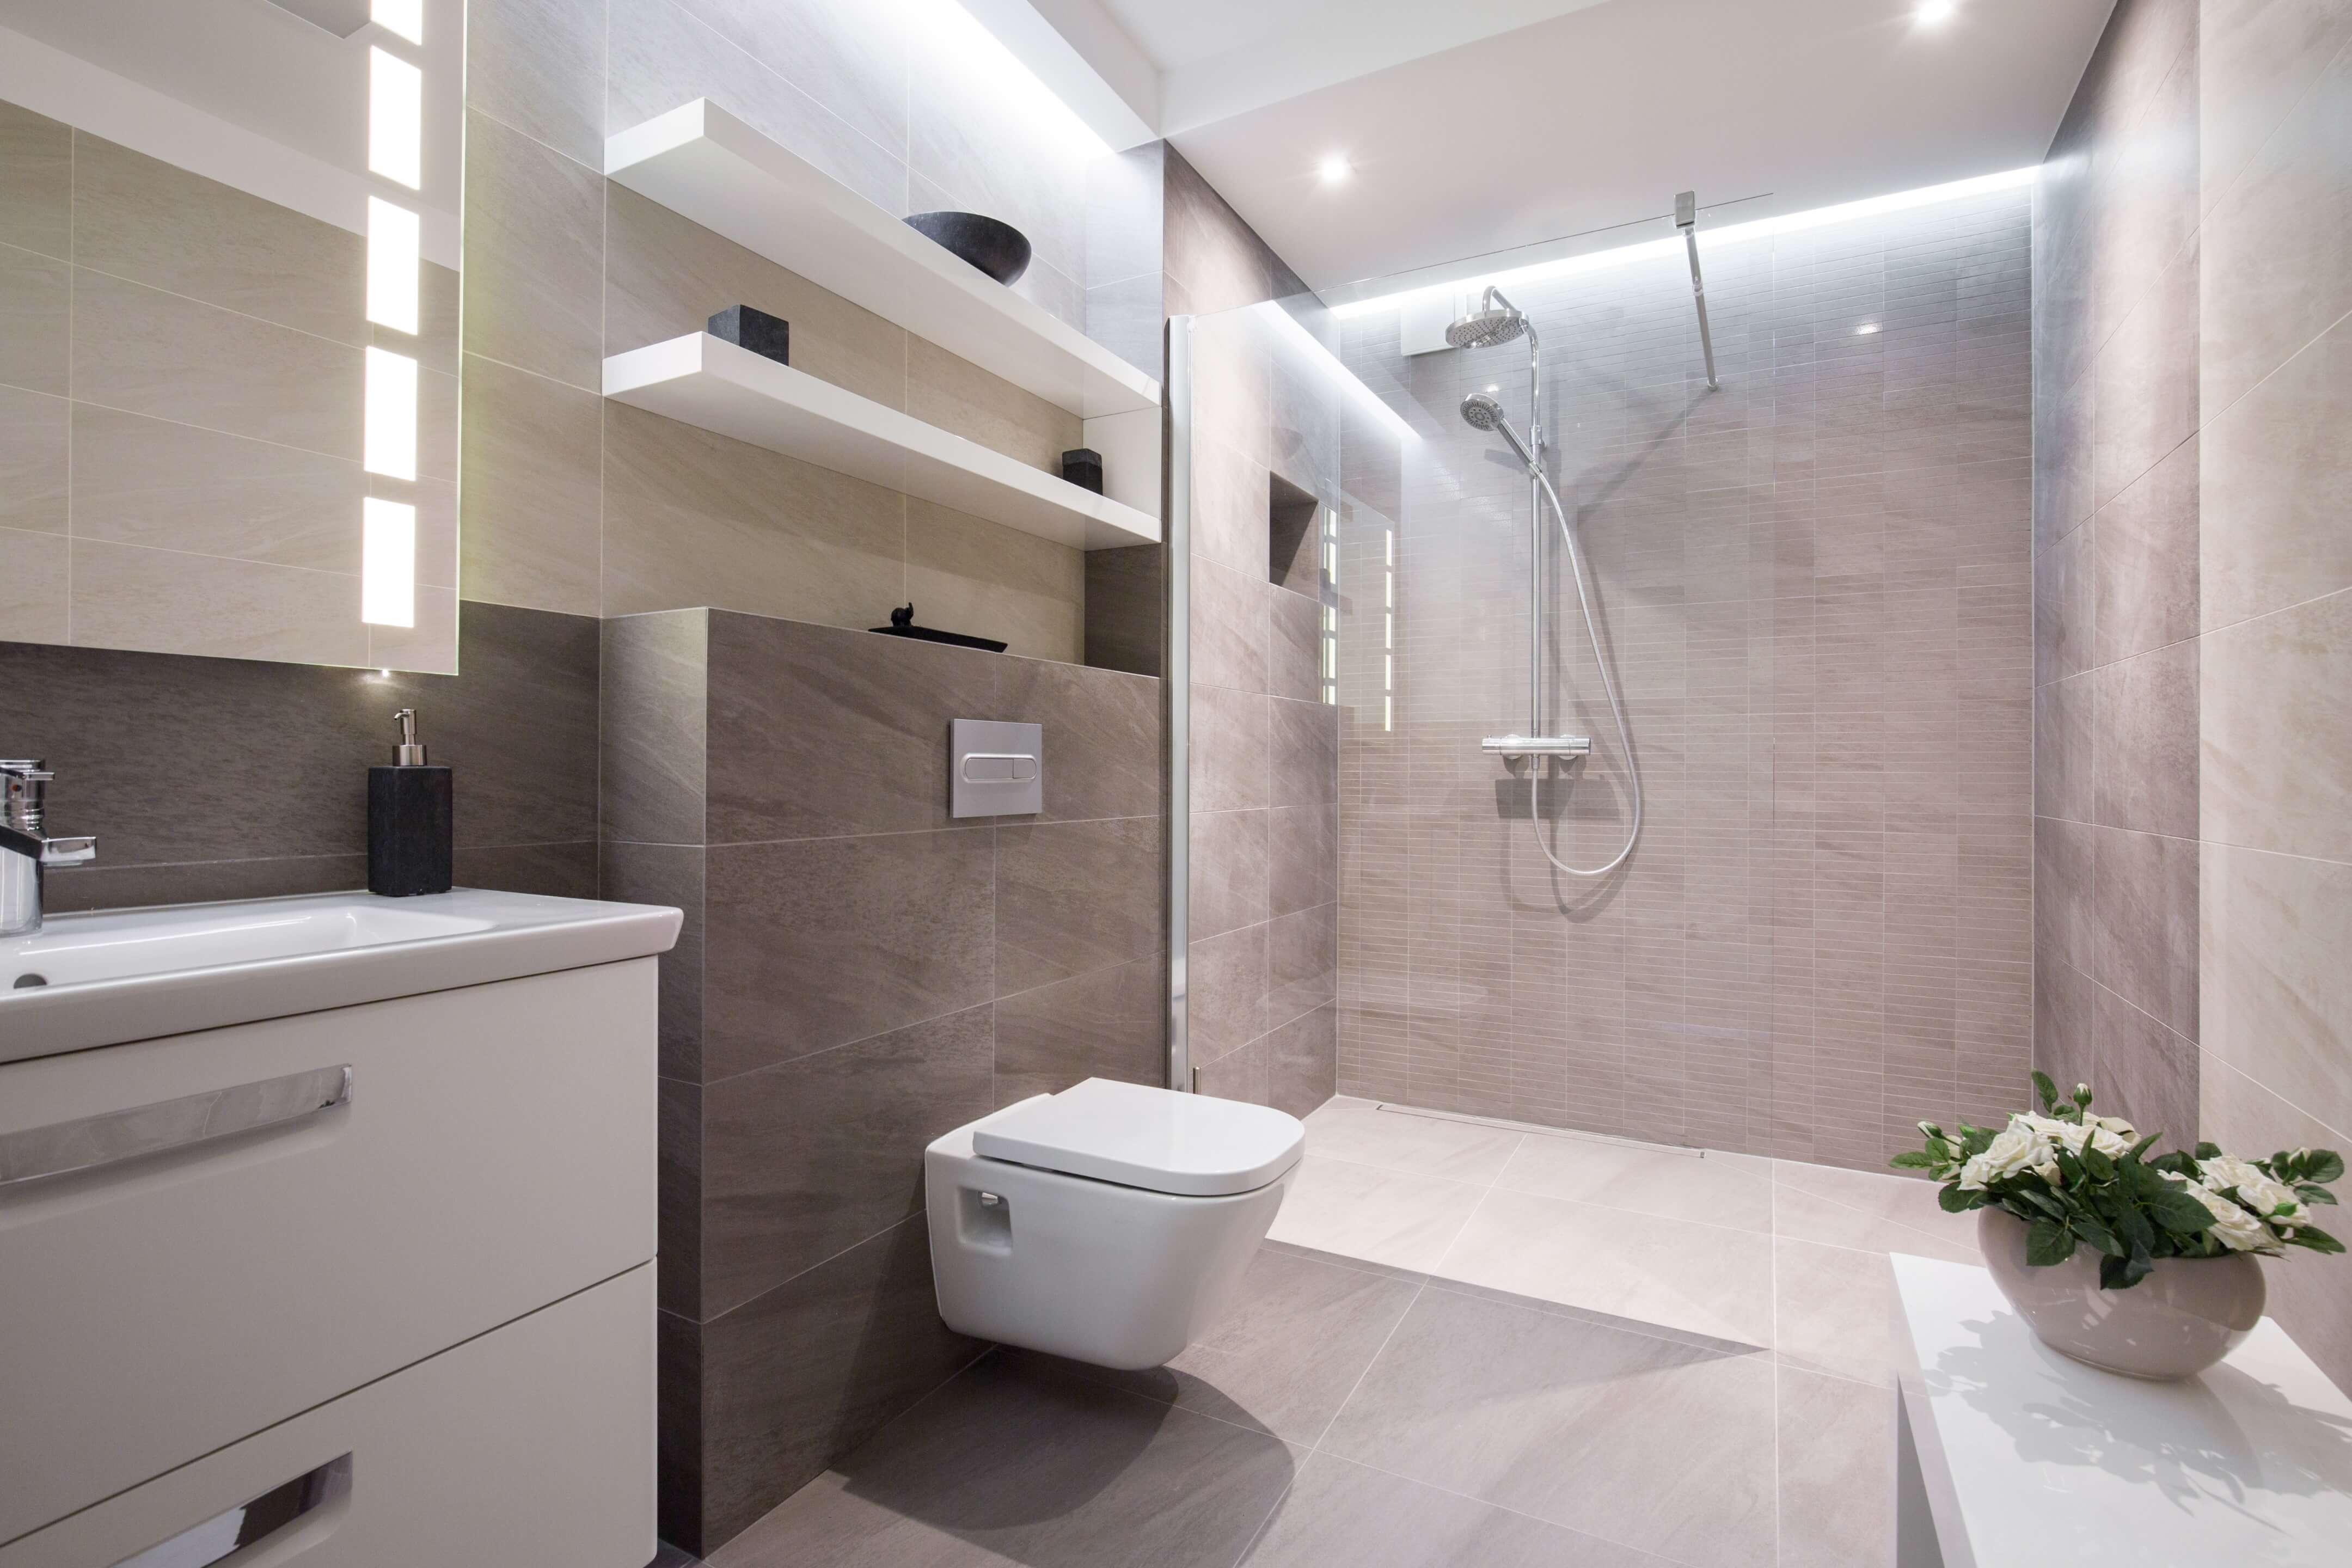 local bathroom fitters